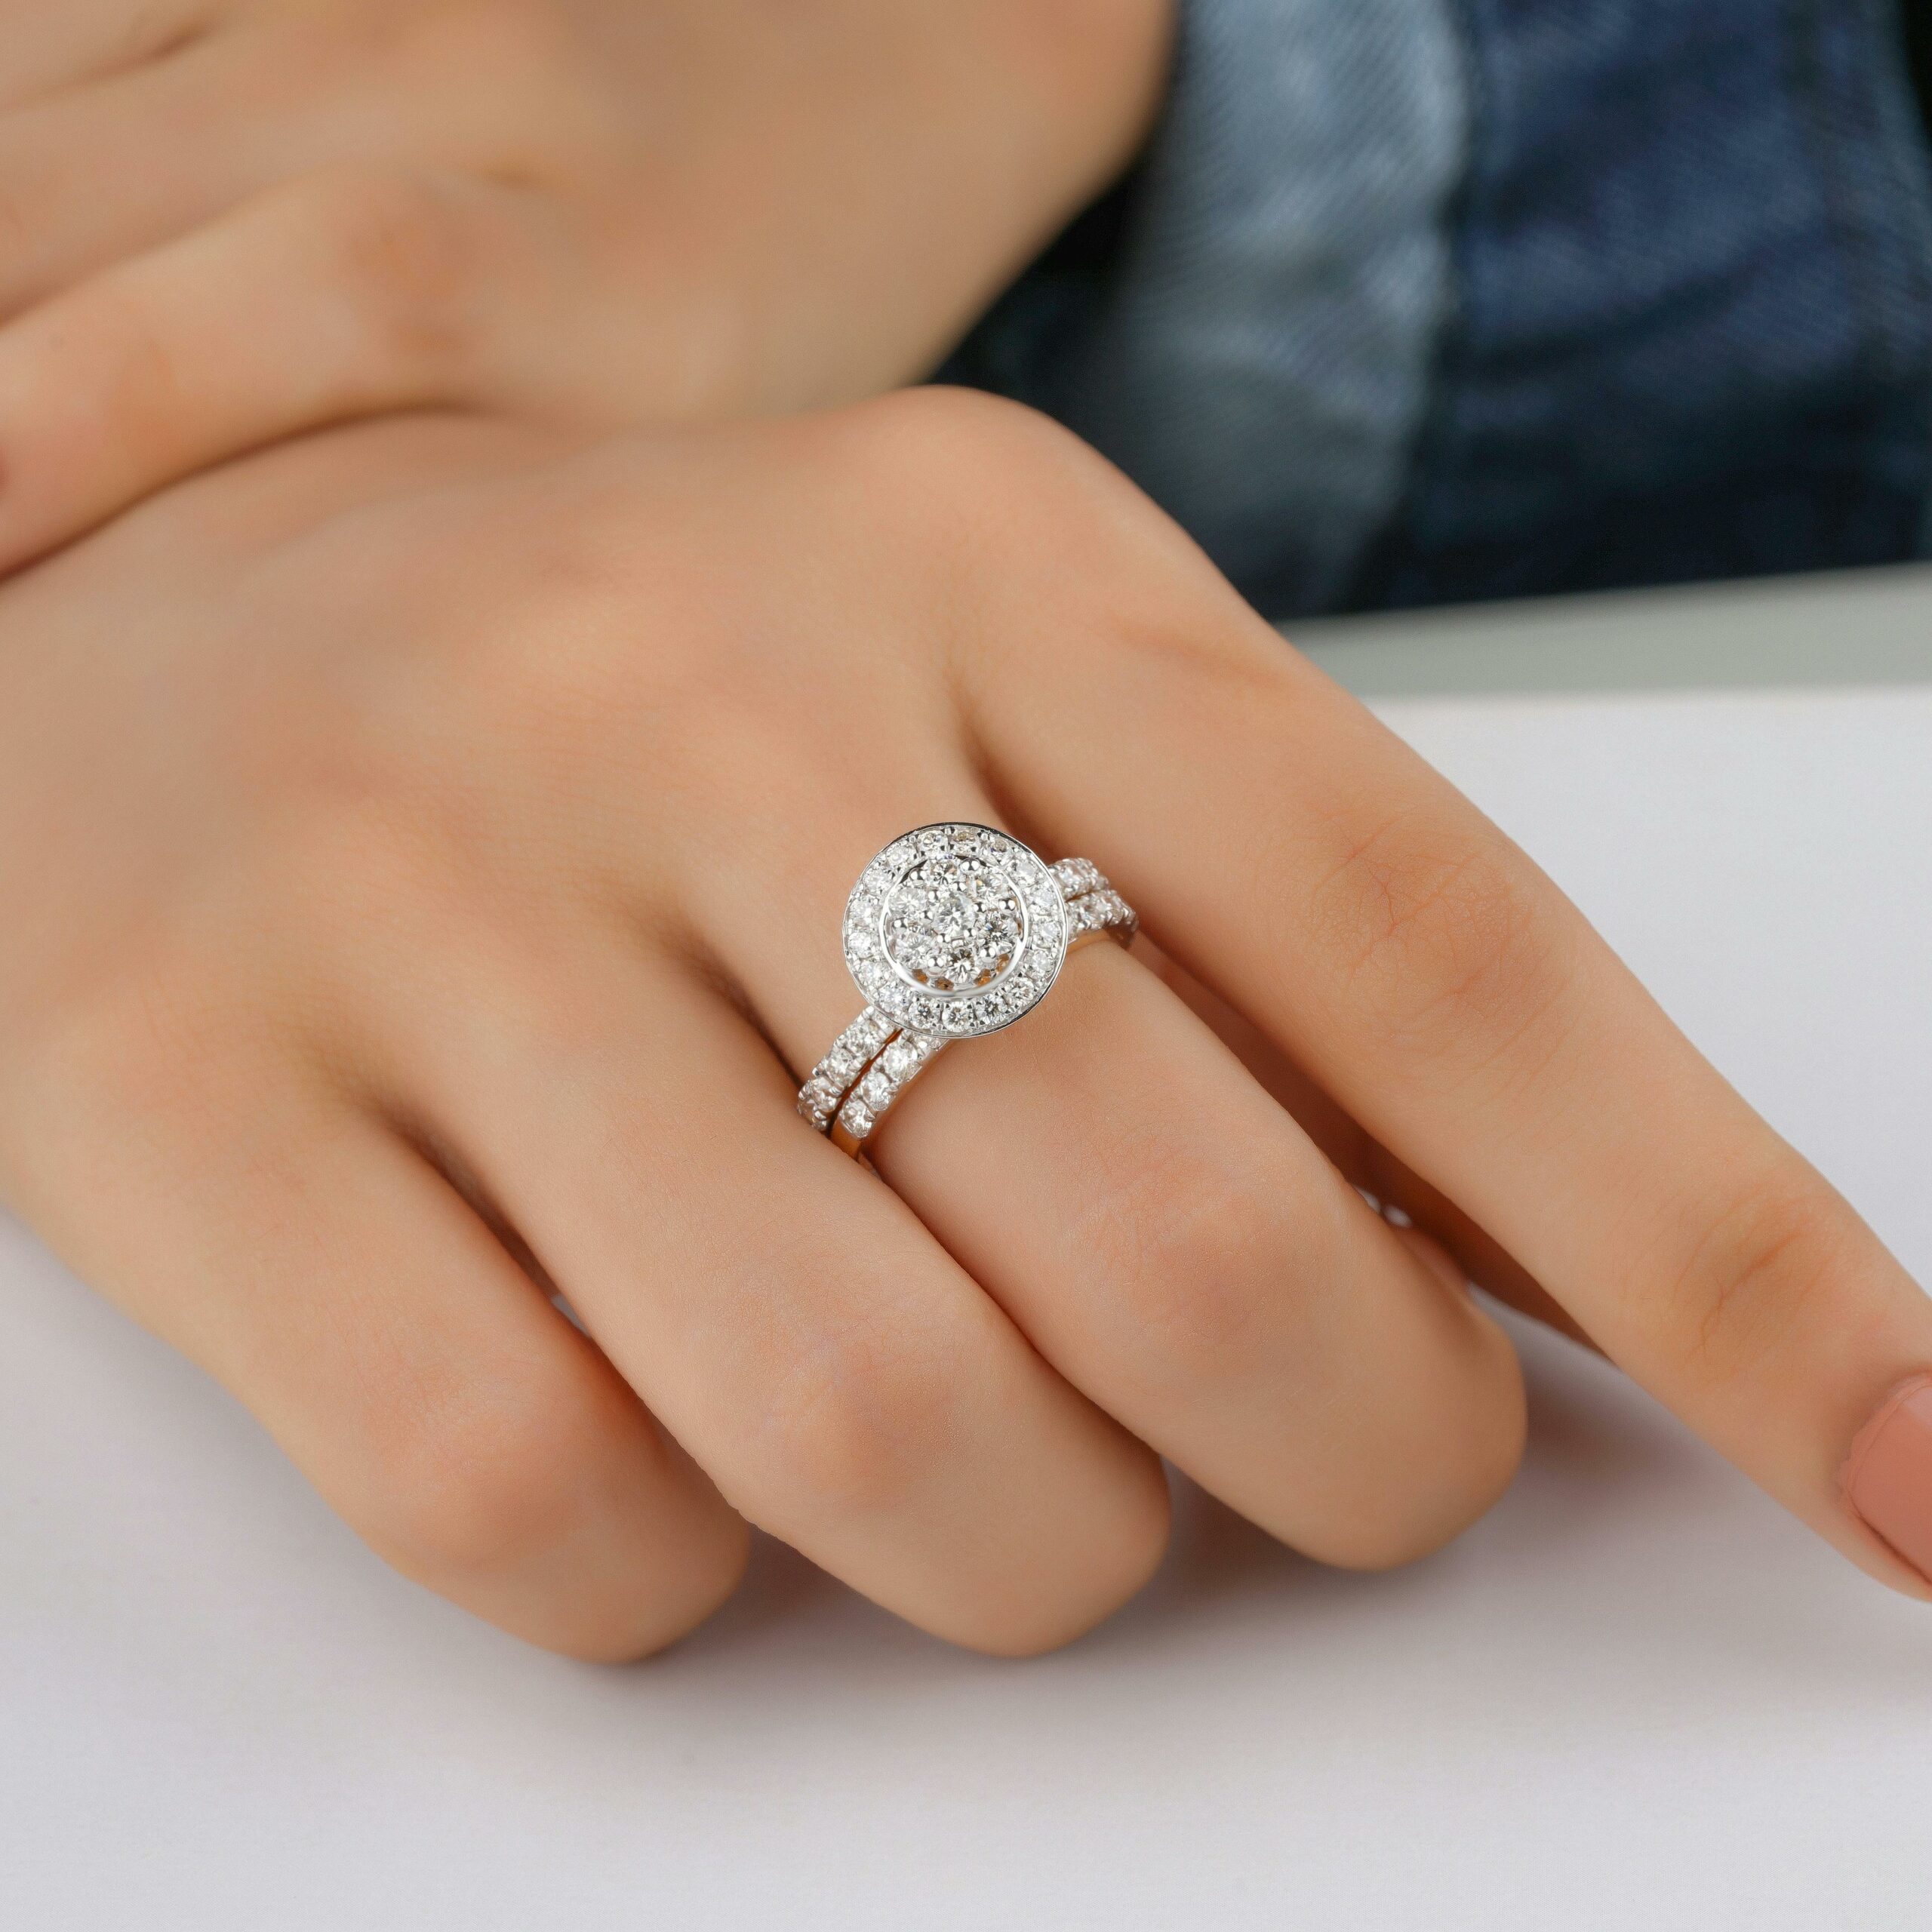 Consider These 6 Things When Buying a Diamond